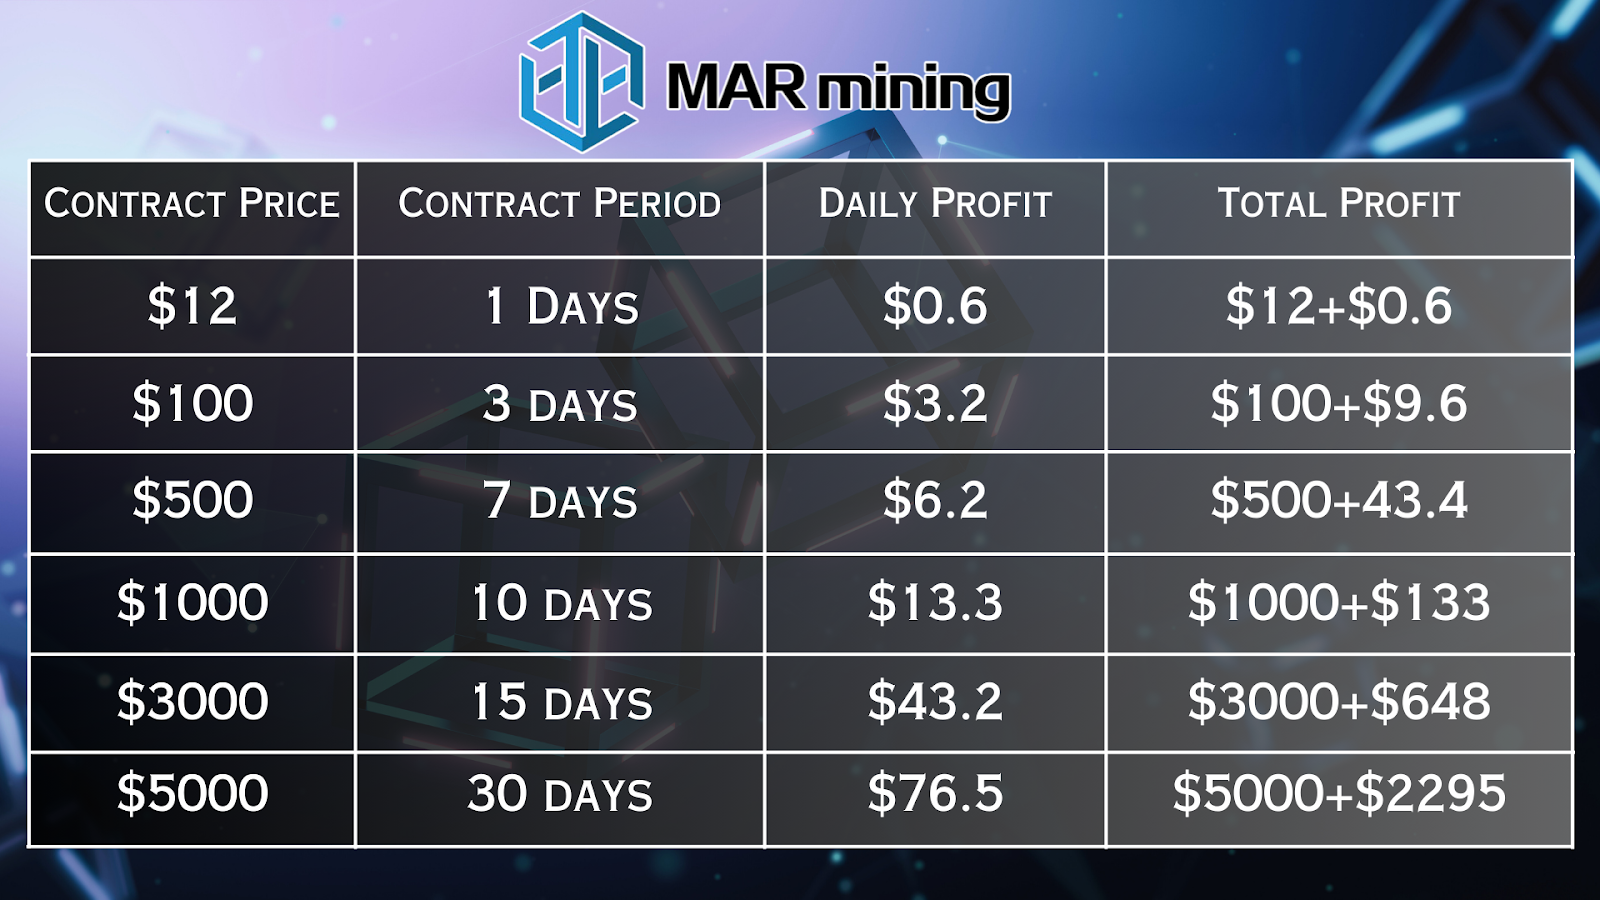 Simplify Cloud Mining: MAR Mining’s Innovative Way to Increase Cryptocurrency Wealth